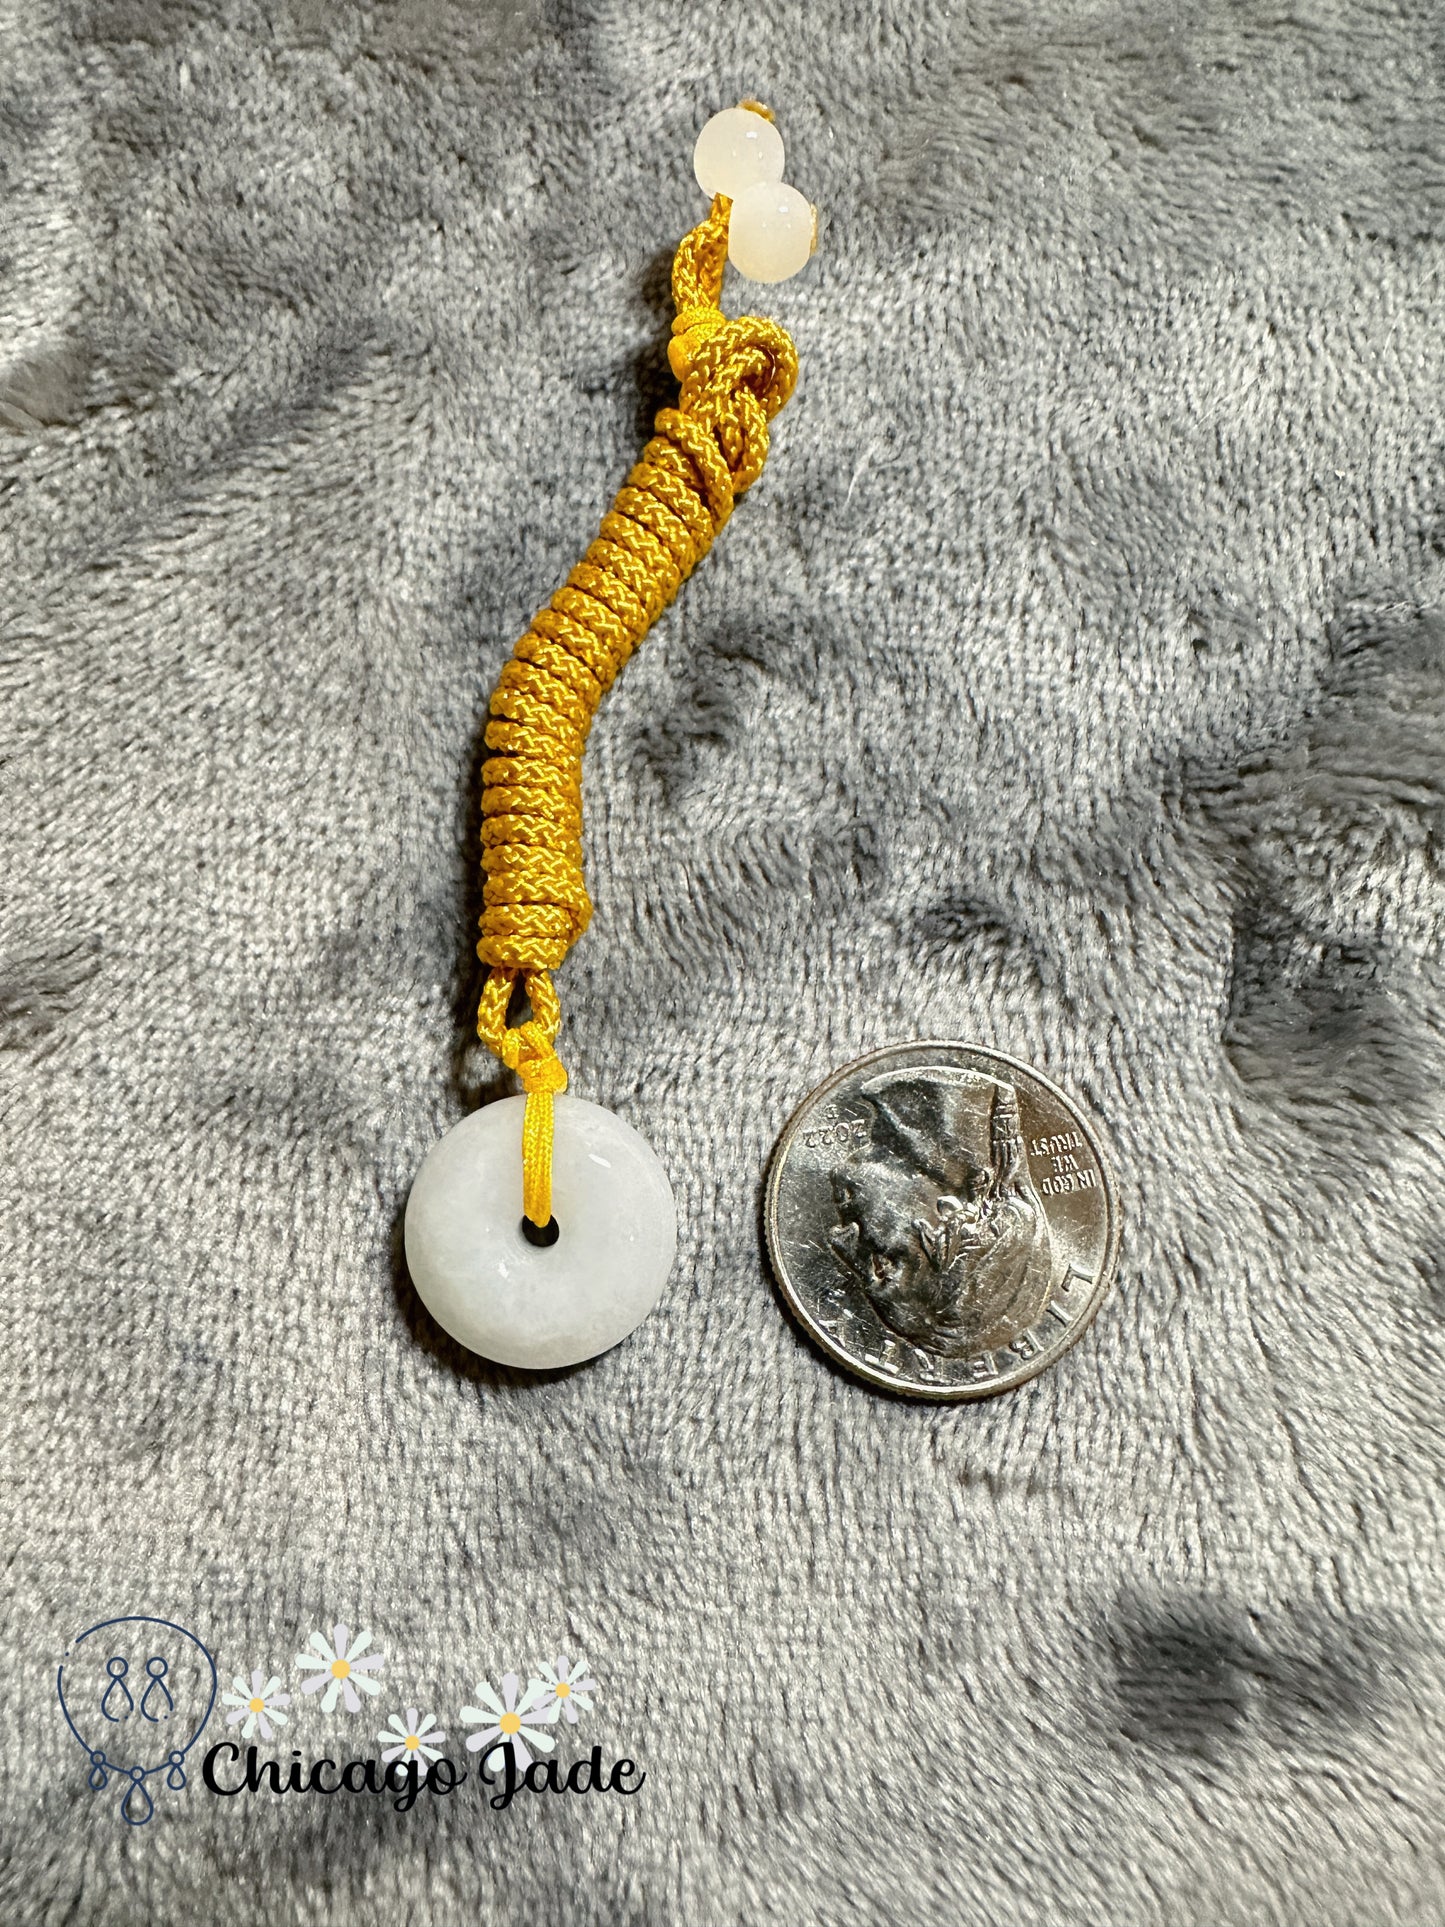 Pingan Kou string necklace jadeite jade stone yellow rope authentic jade good wishes for safety